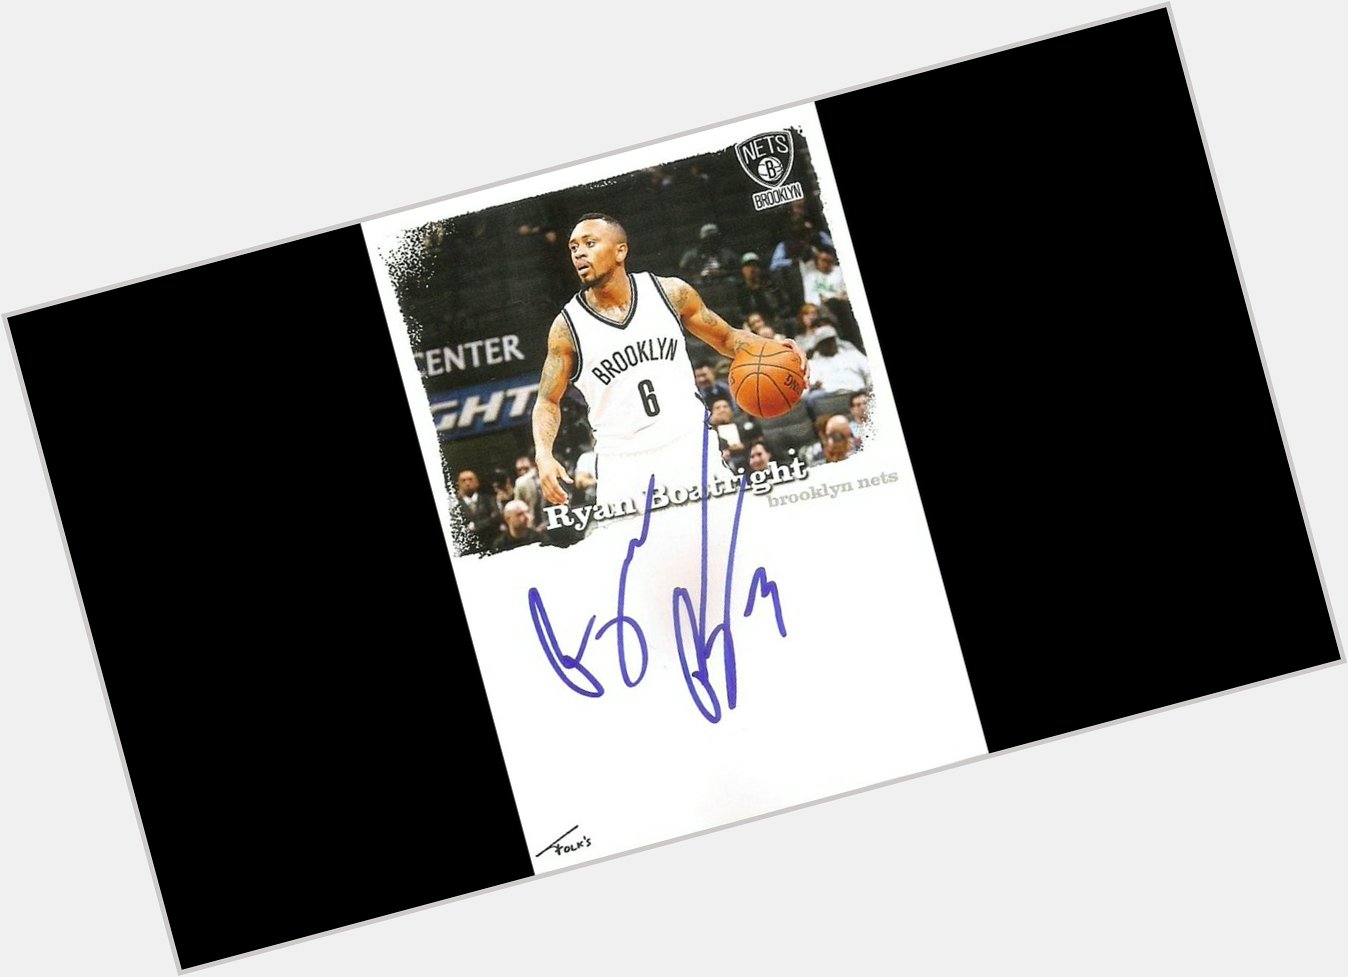 Happy Birthday to Ryan Boatright of who turns 25 today. Enjoy your day 